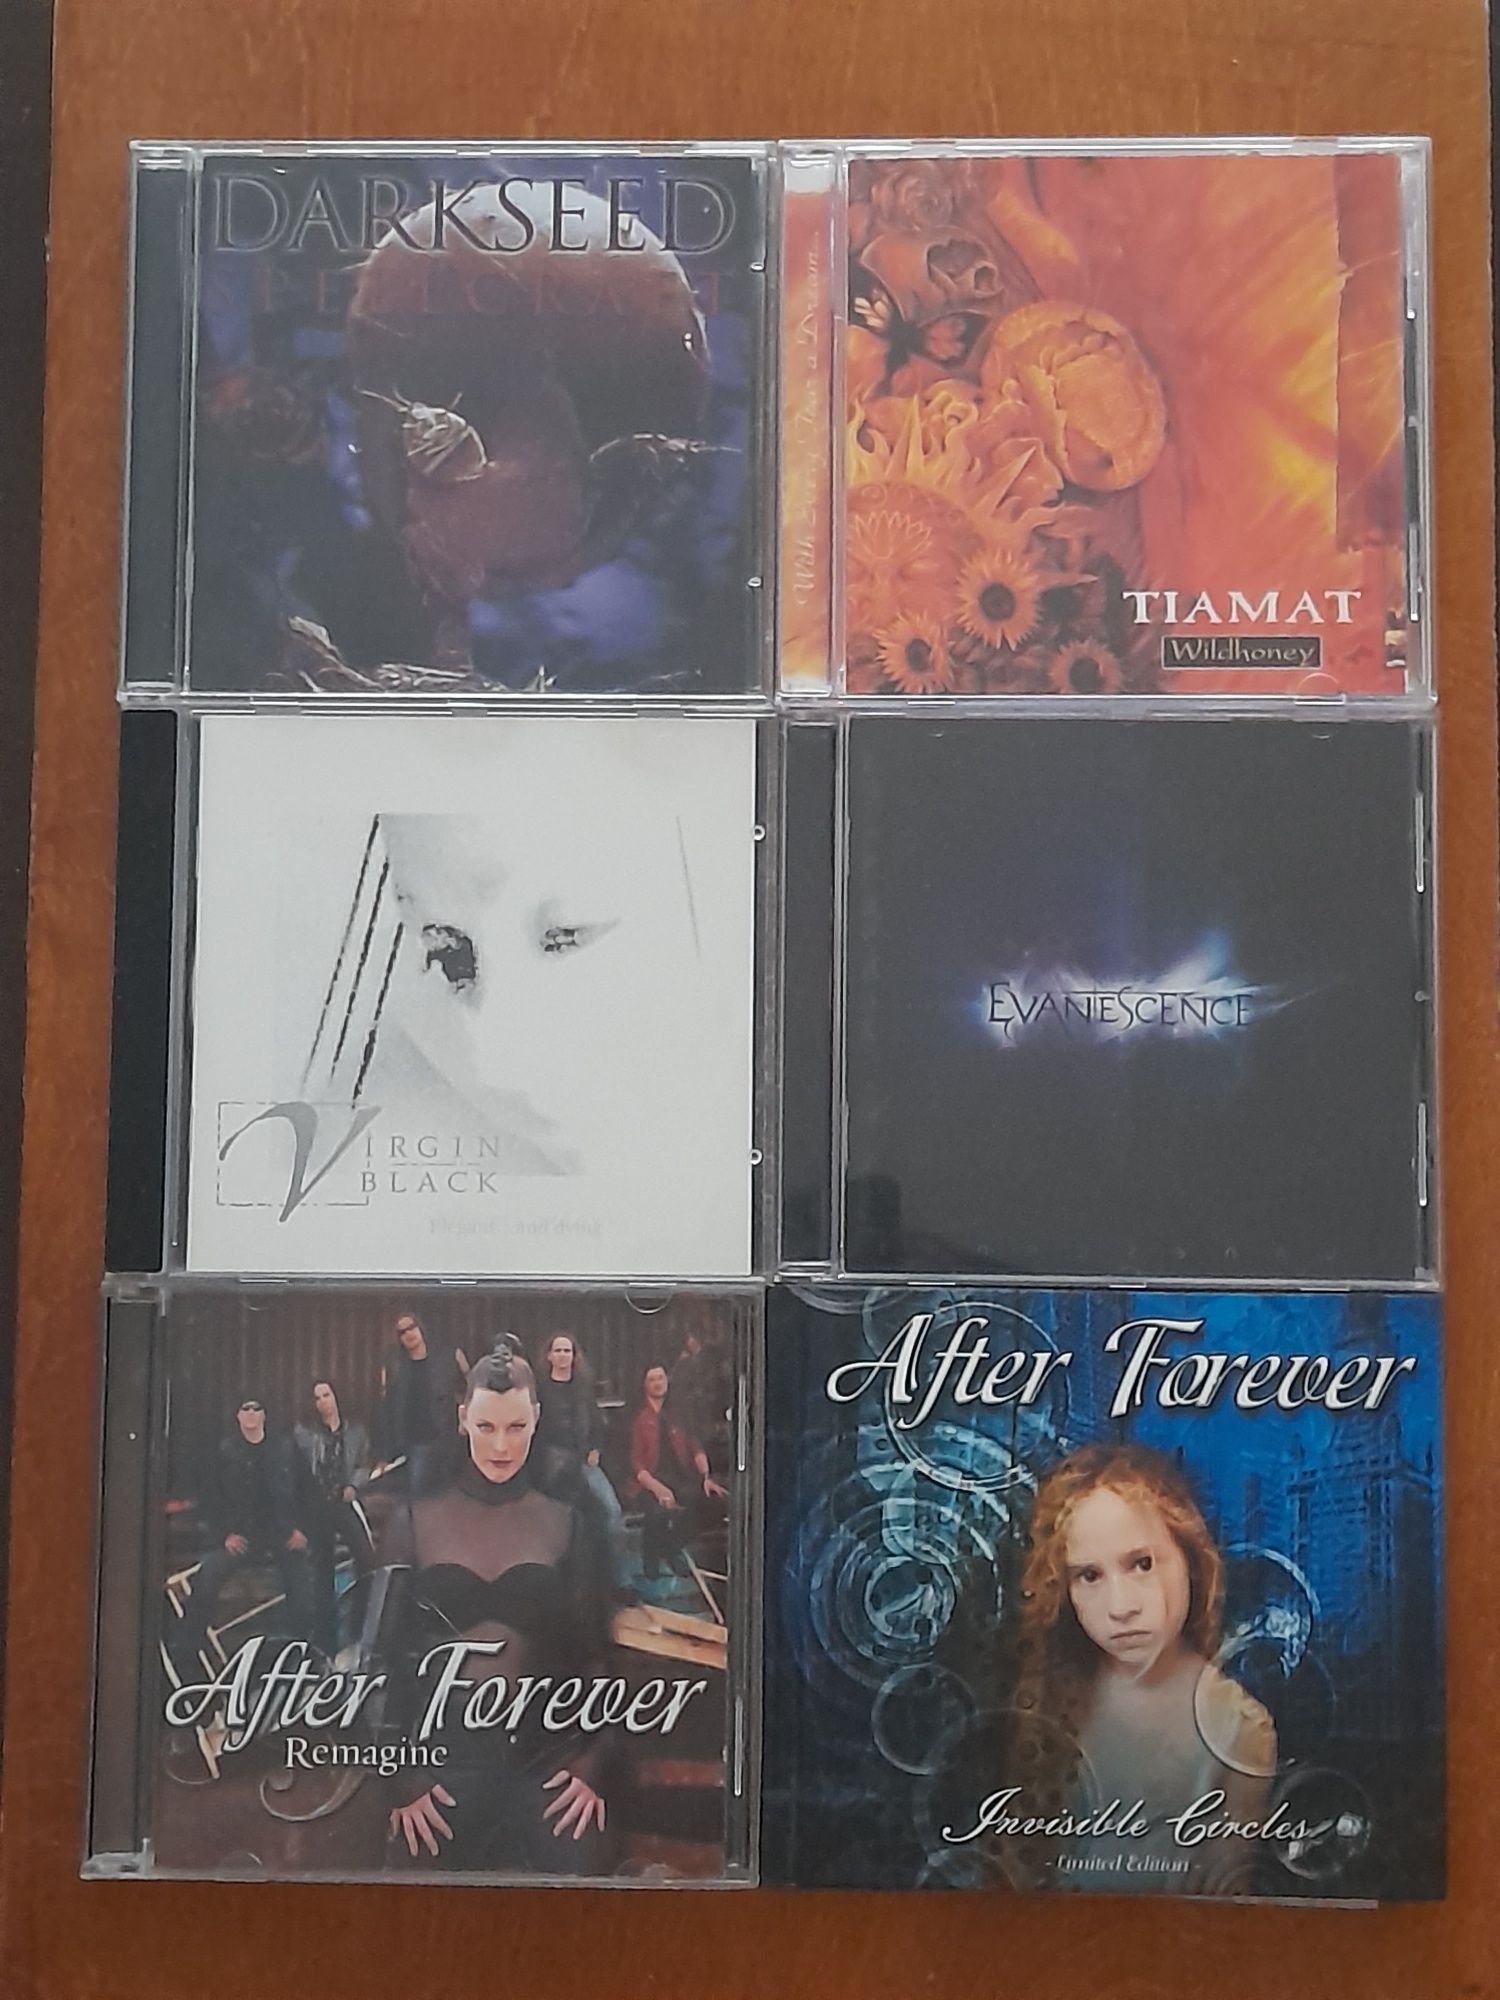 Фирменные CD диски After Forever, Evanescence, Darkseed,Tiamat